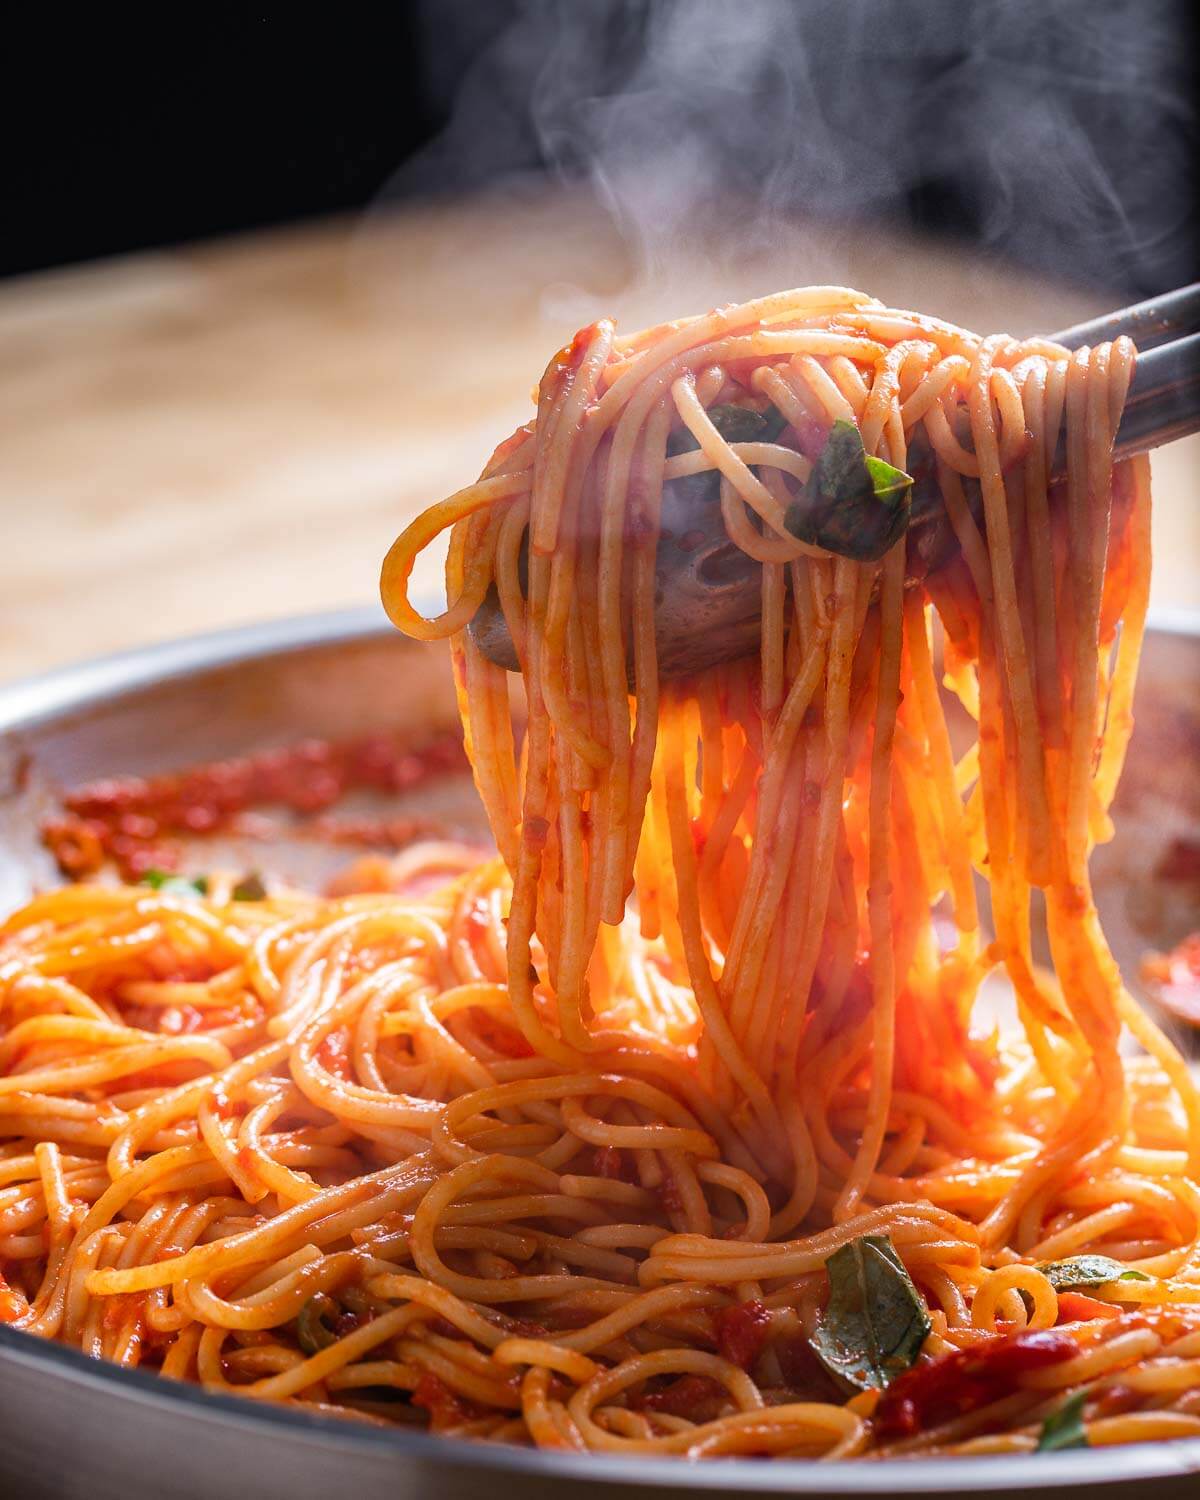 Tongs pulling out hot spaghetti arrabbiata with steam showing.